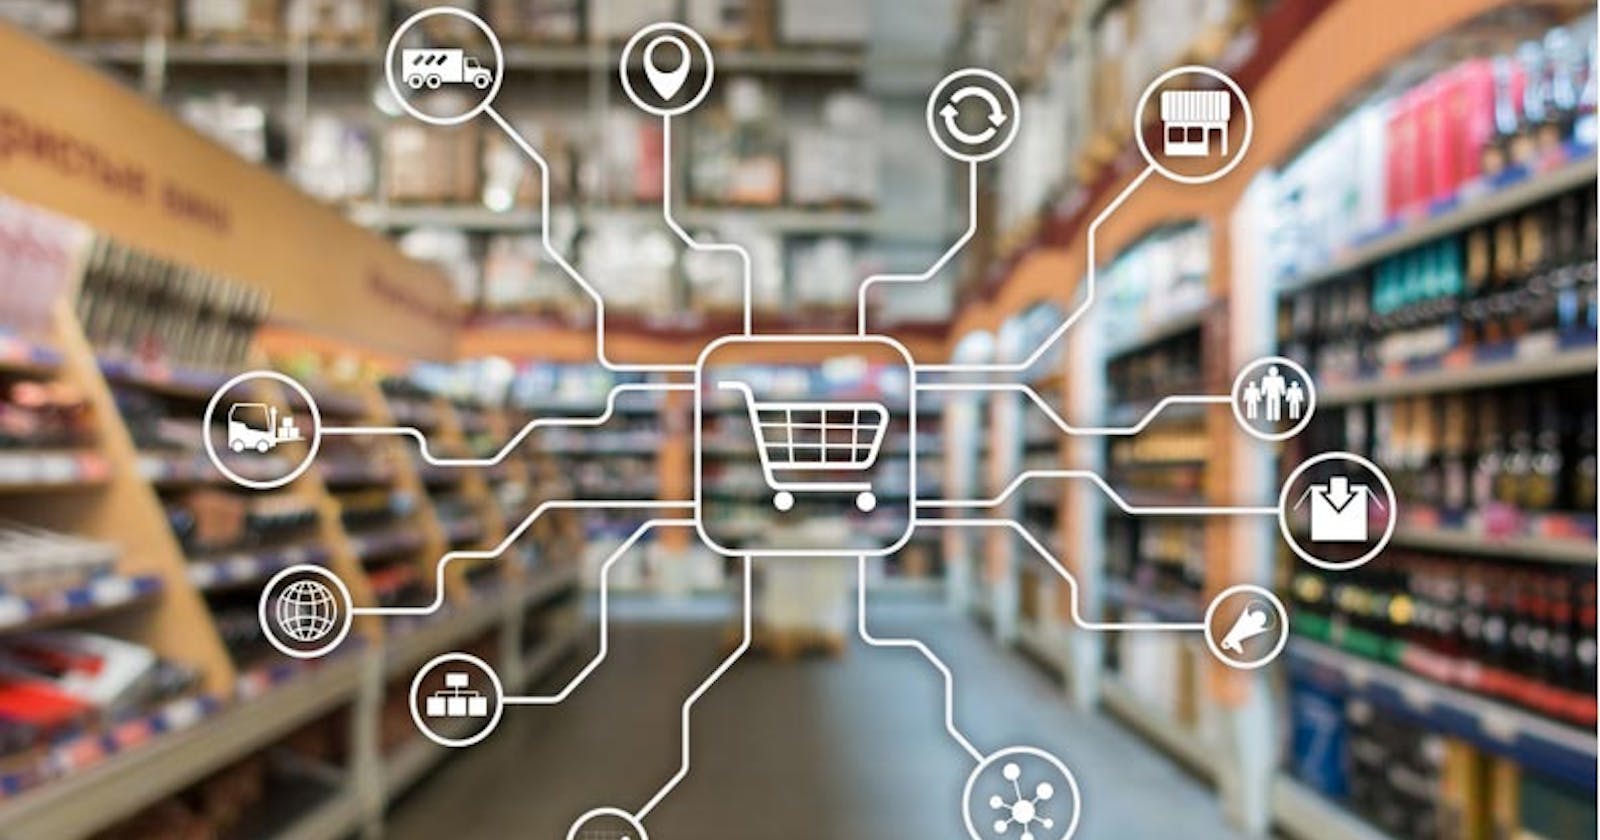 Retail Automation Market 2022: Industry Growth, Share, Trends, Share and Future Scope 2027